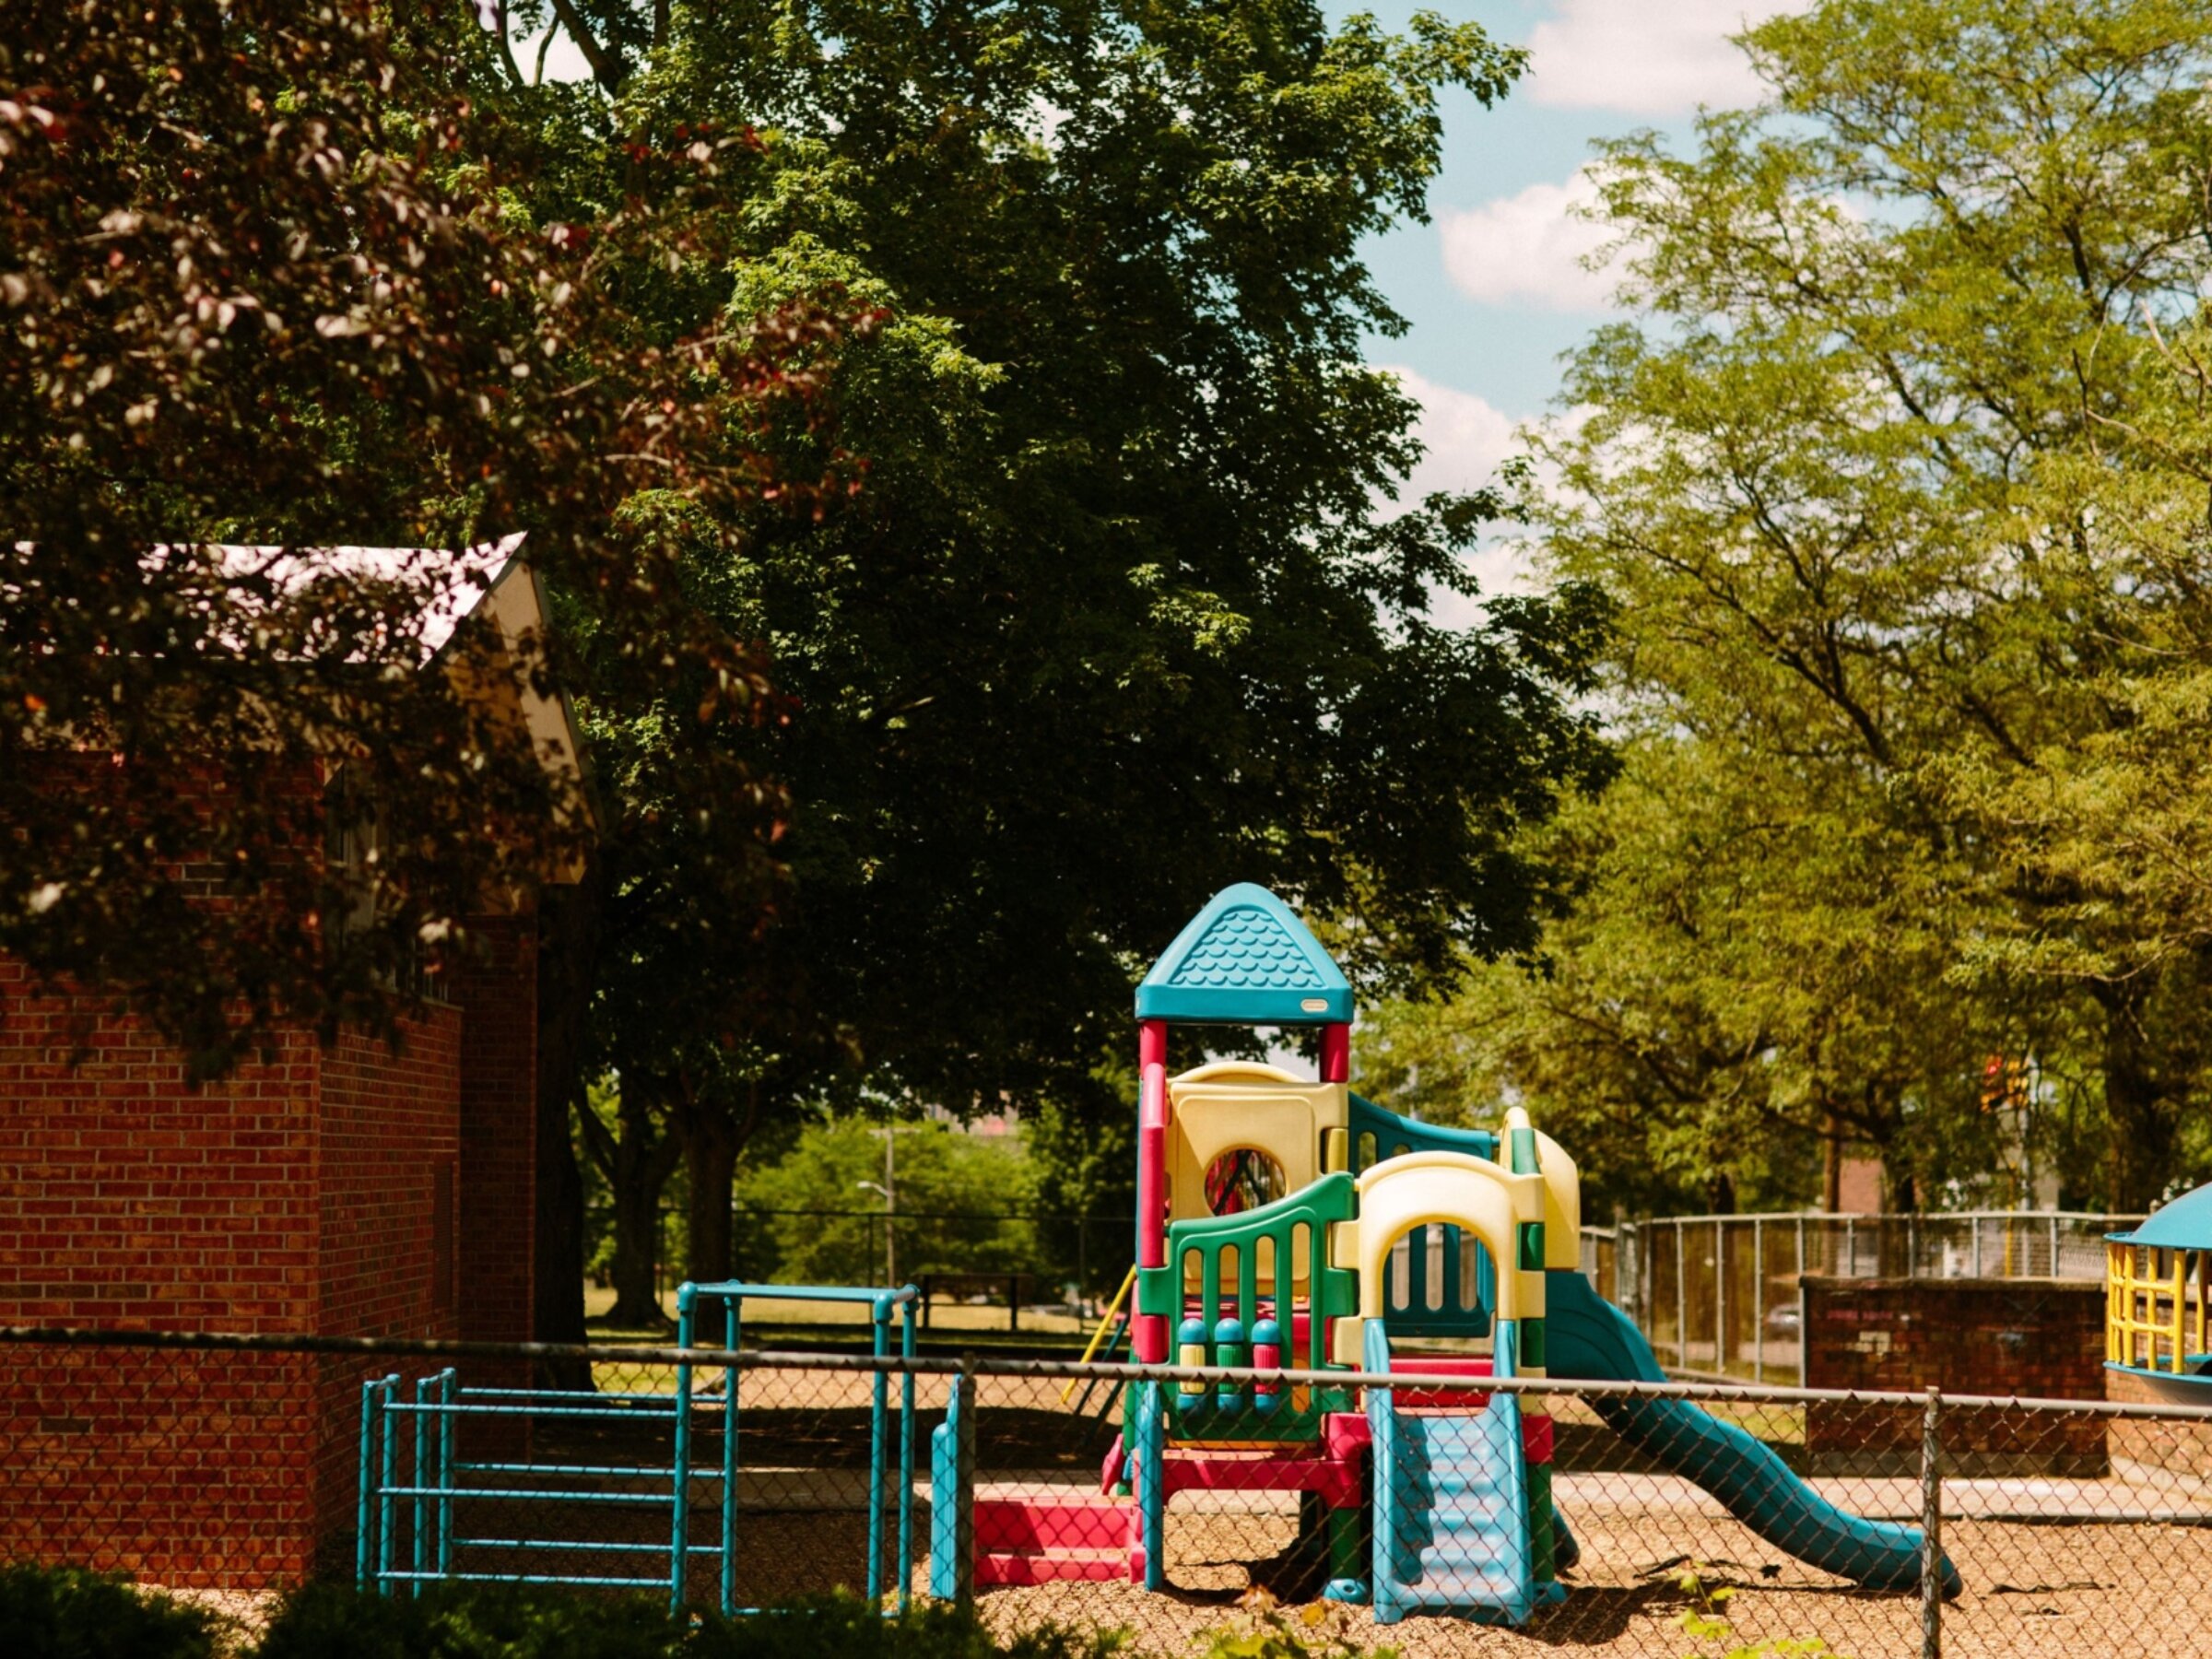 The playground of Post-Franklin sits outside the building under trees